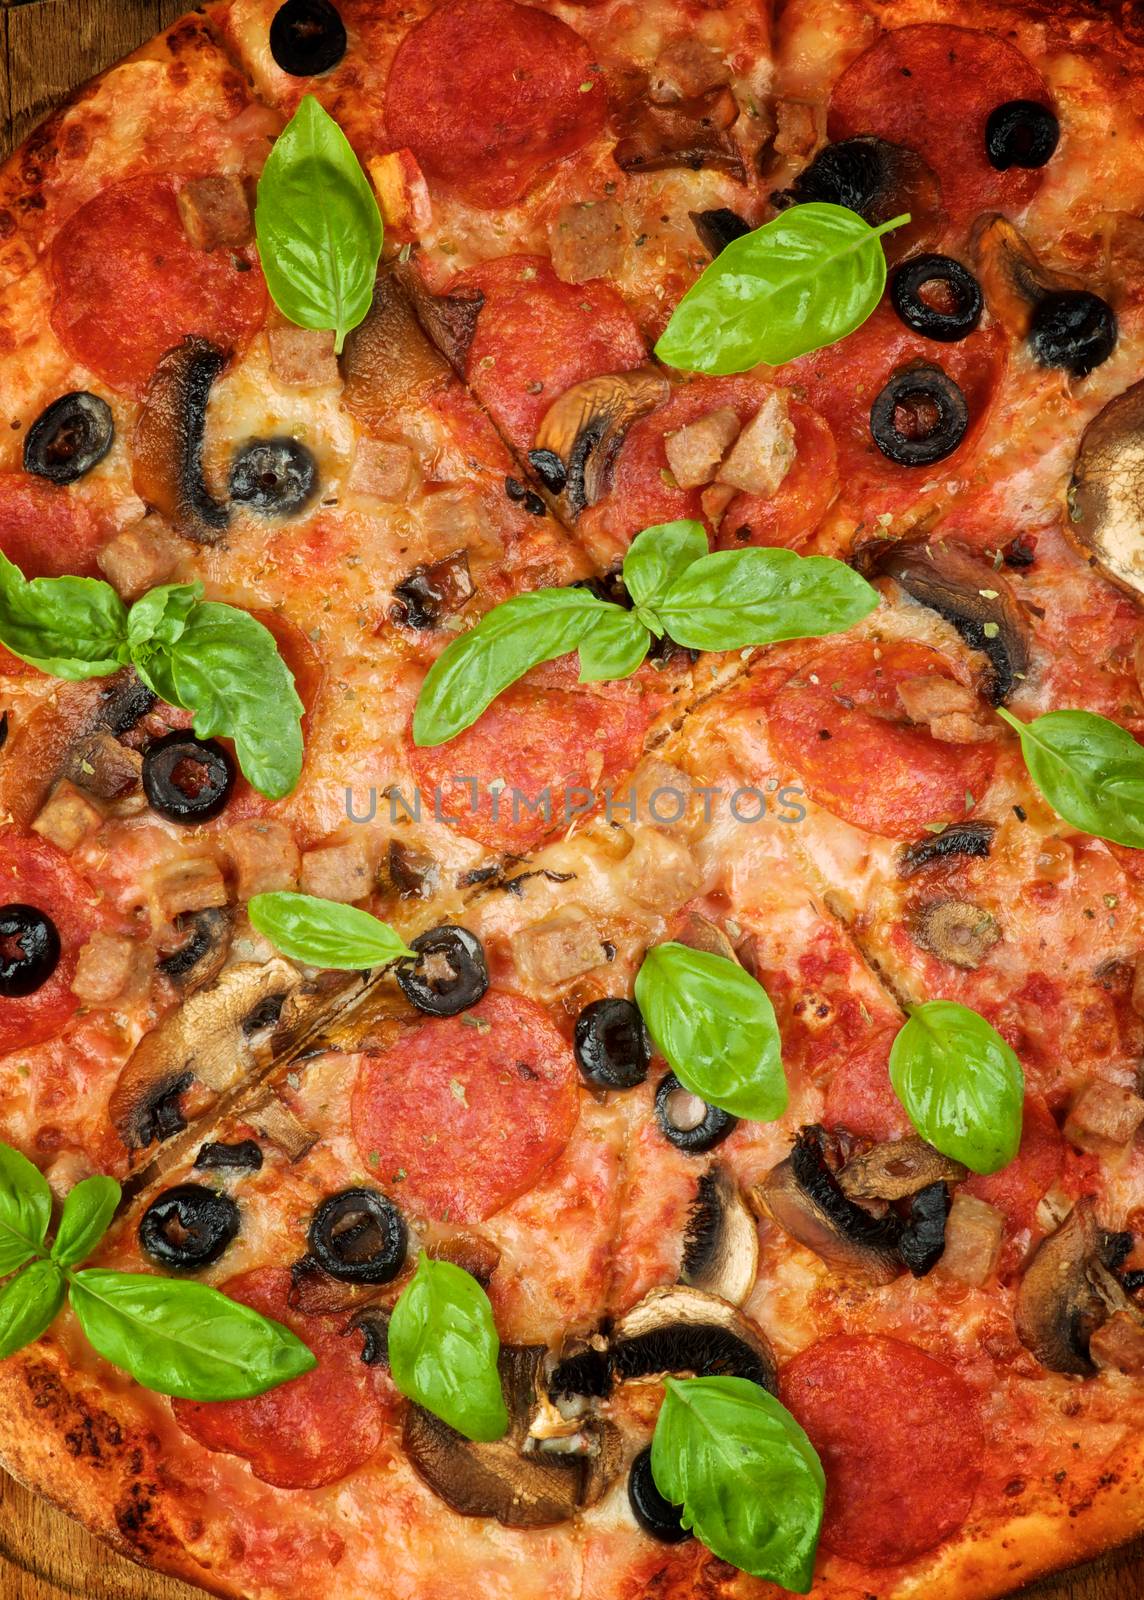 Pepperoni and Mushrooms Pizza by zhekos